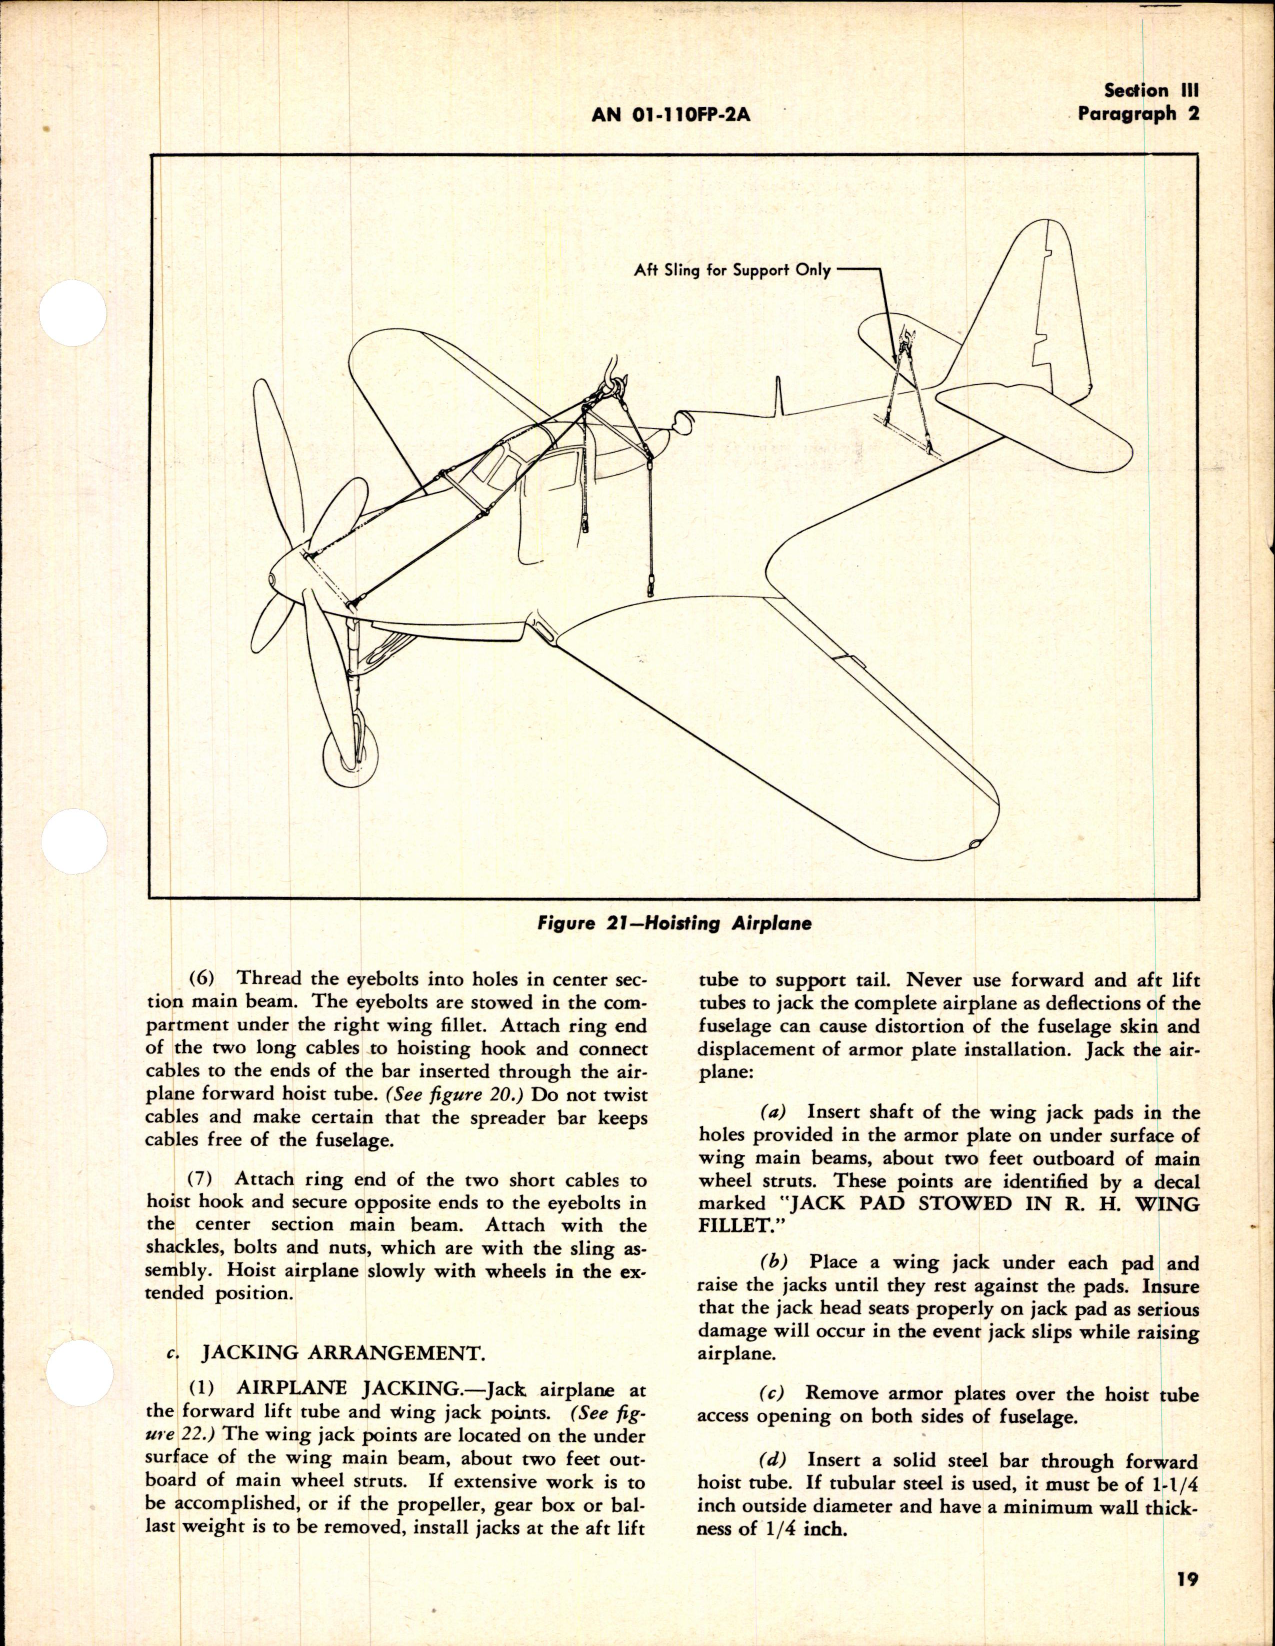 Sample page 3 from AirCorps Library document: Erection and Maintenance Instructions for RP-63A